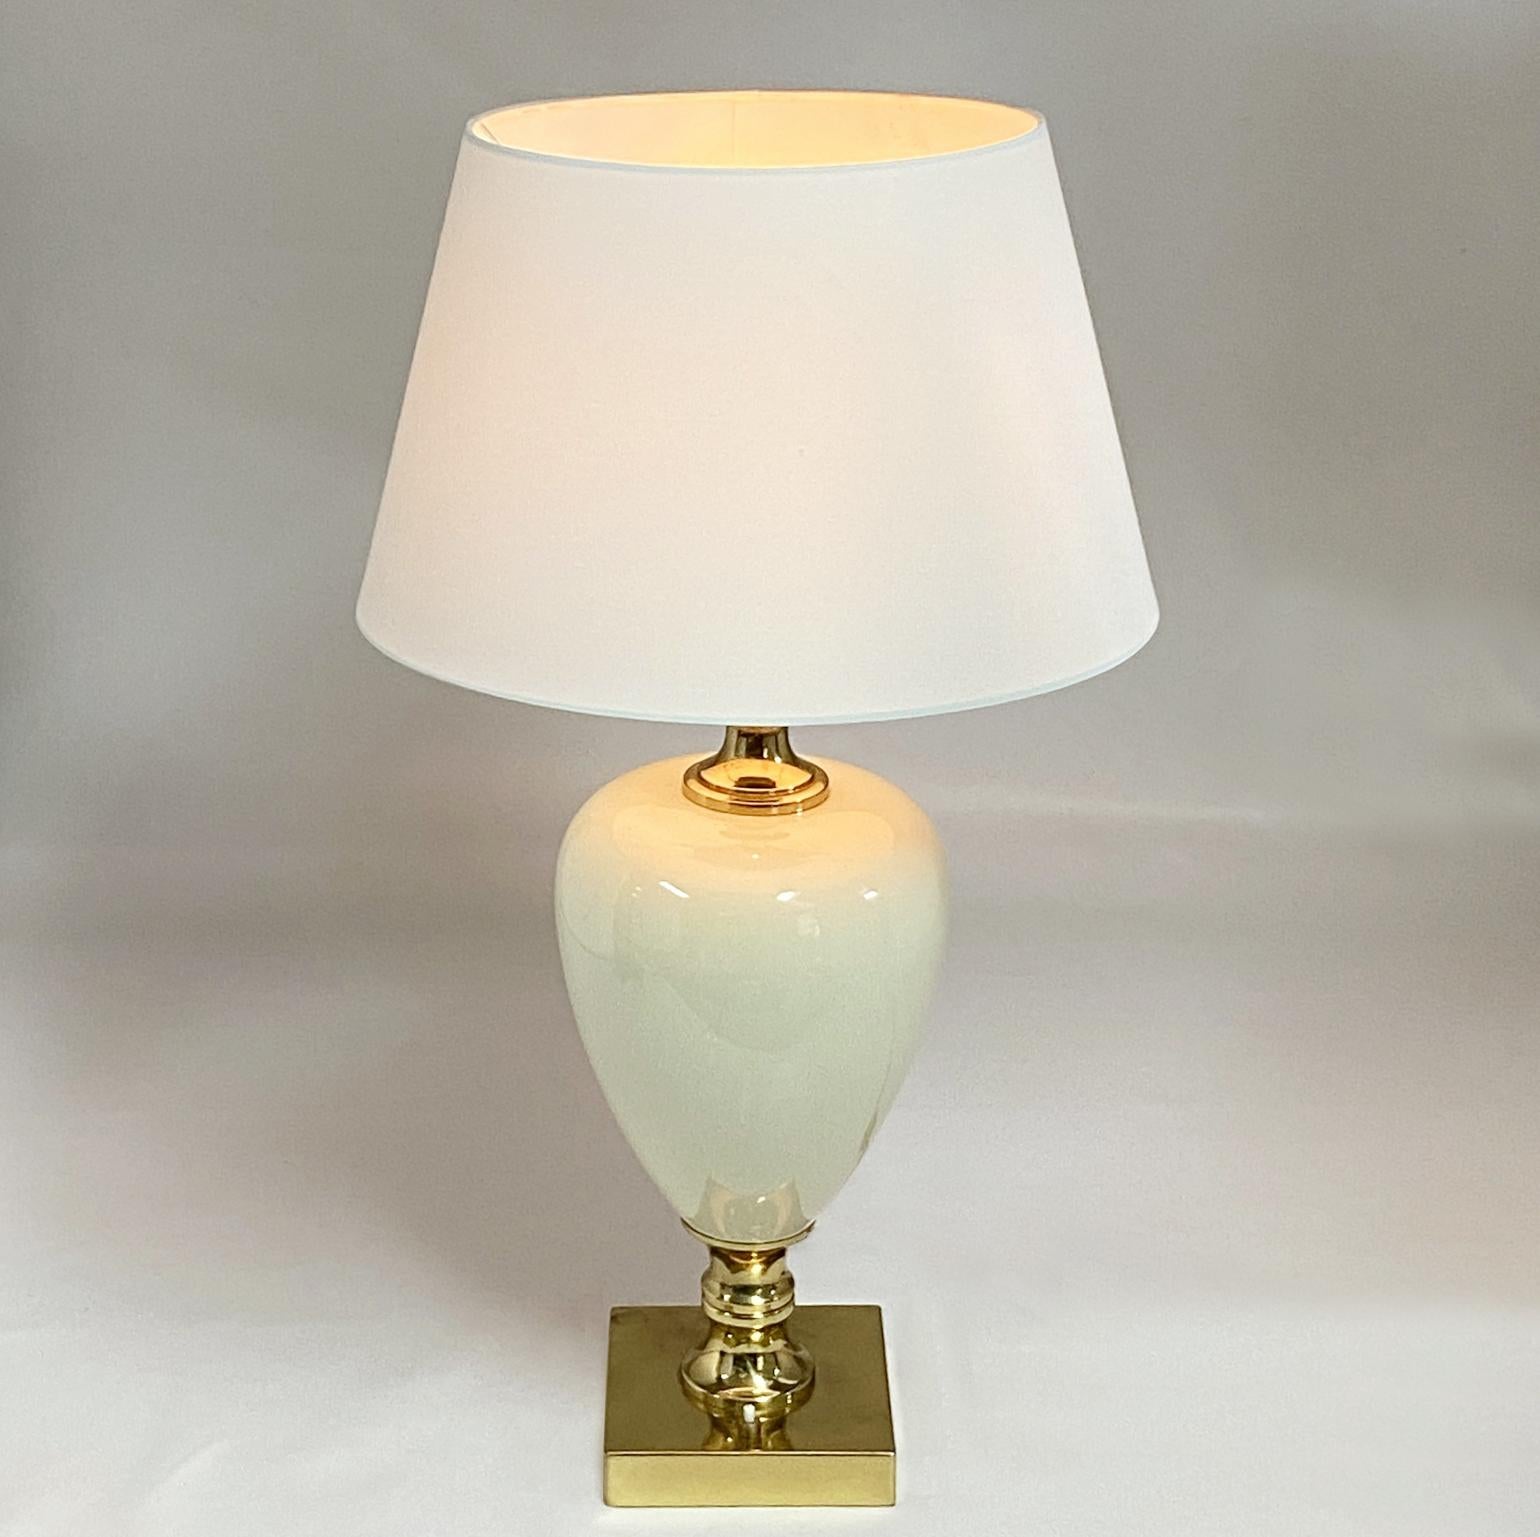 Hollywood Regency Pair of Cream Porcelain and Brass Table Lamps by Zonca, Italy, 1970s For Sale